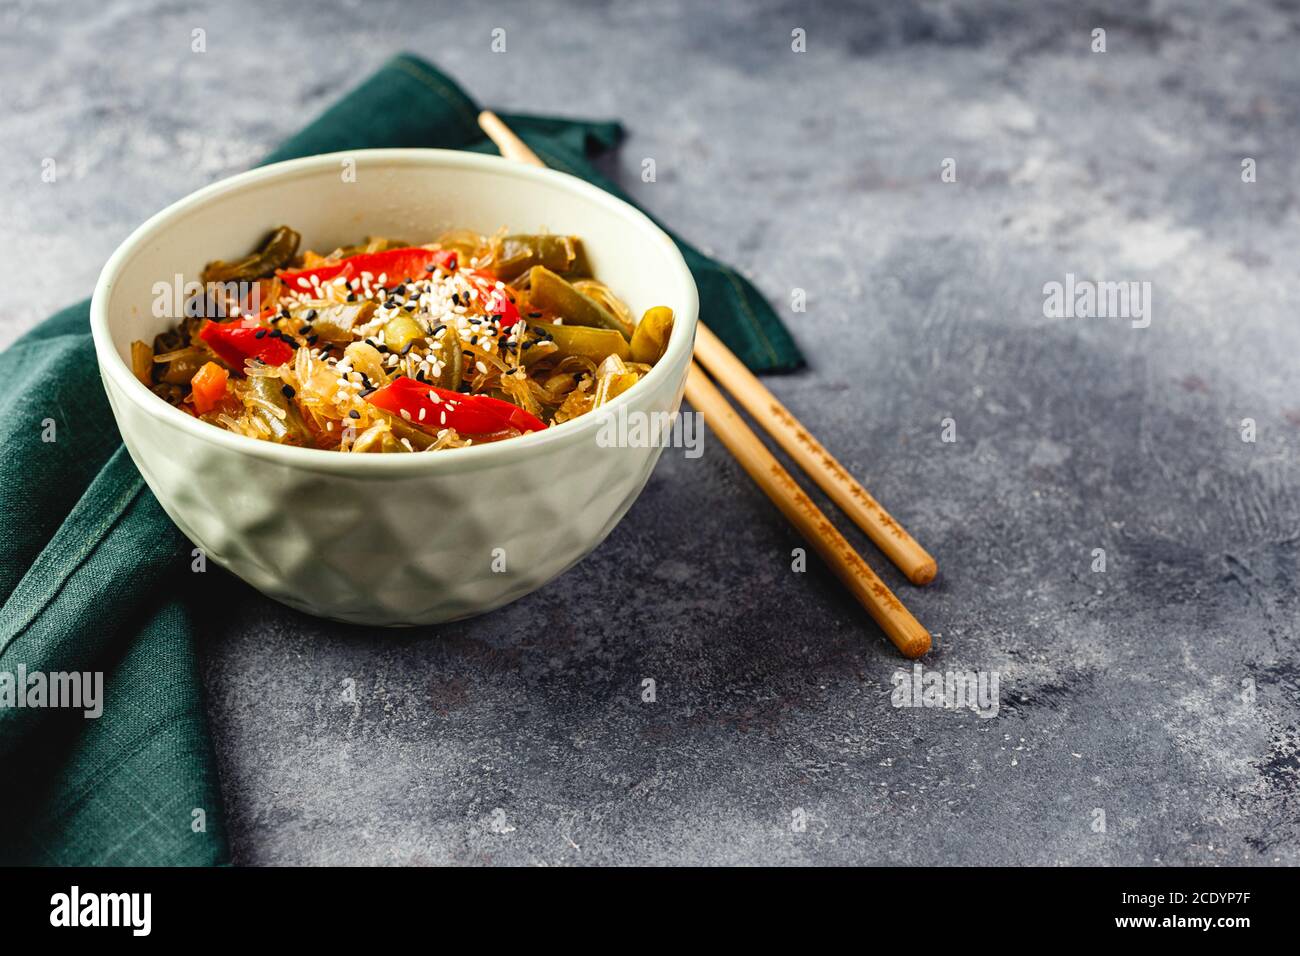 Noodles and green beans. Stock Photo